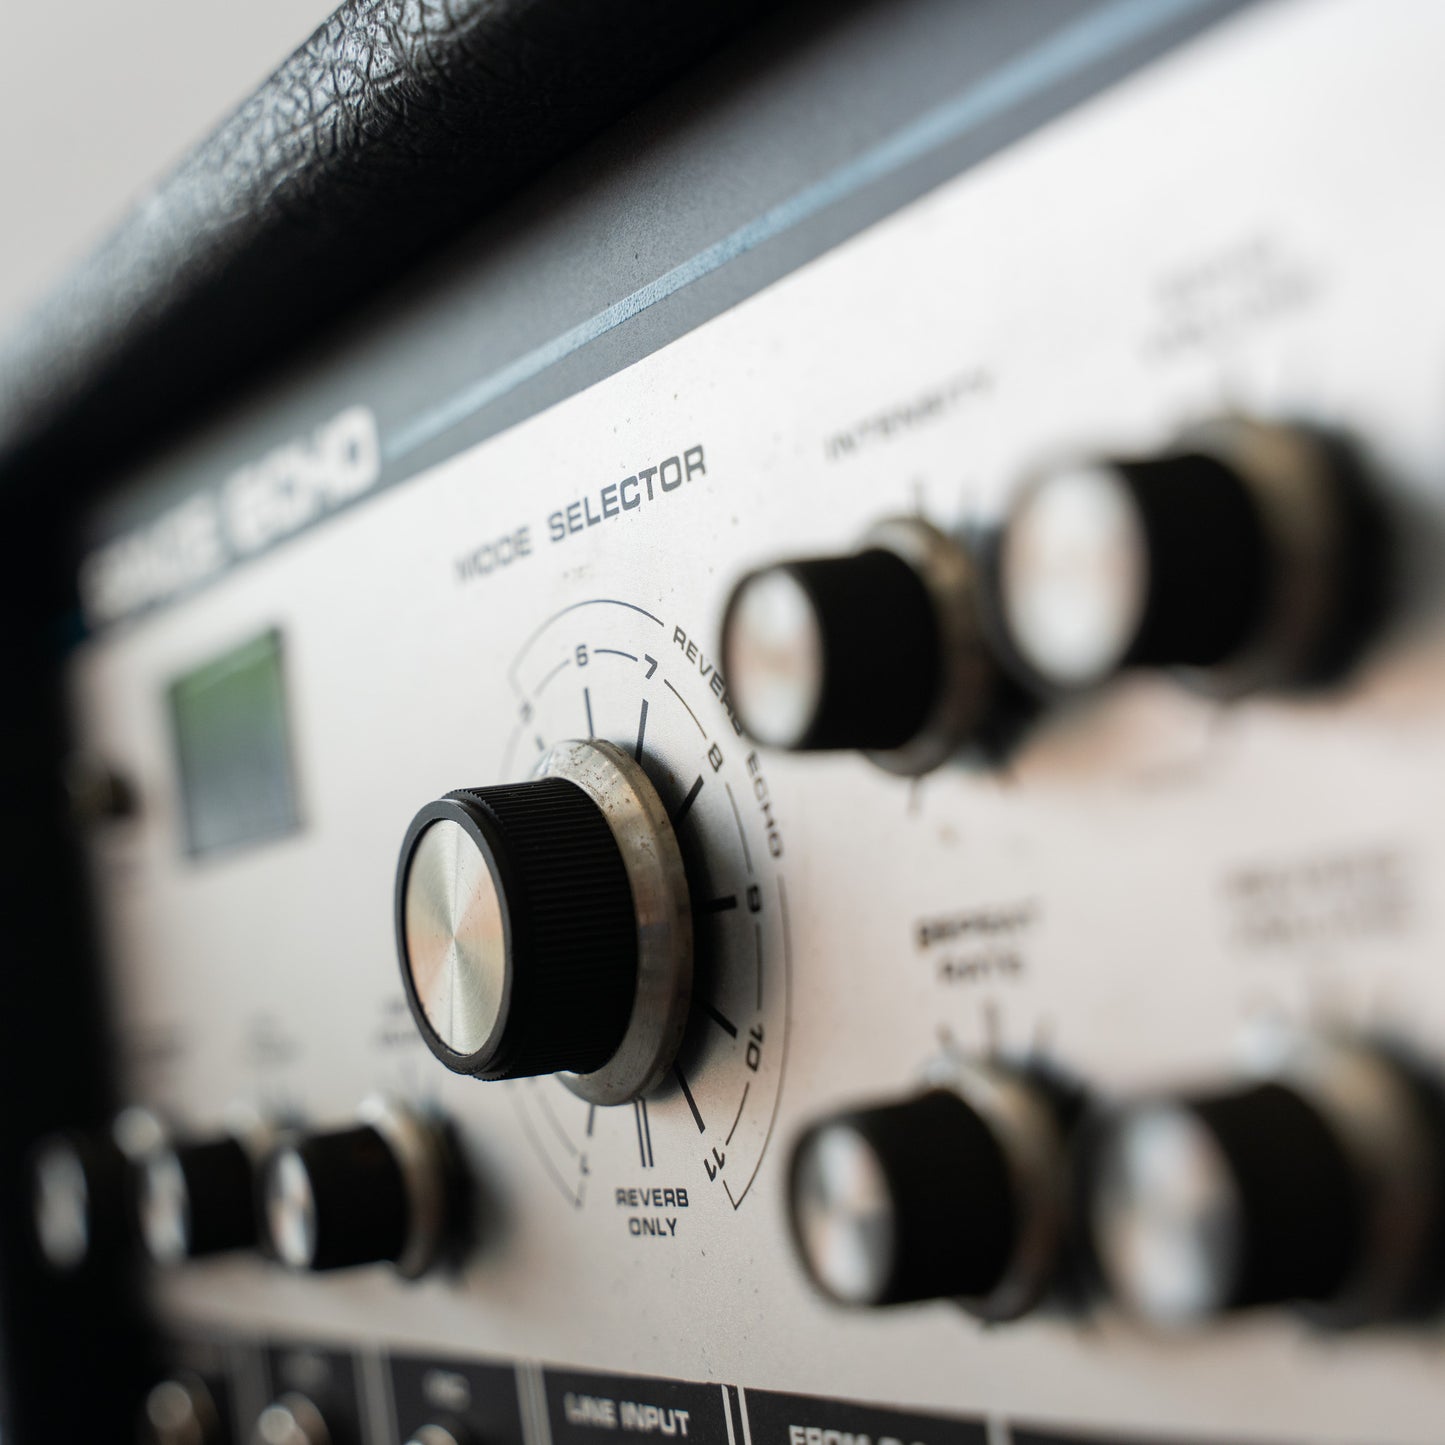 RE-200 Space Echo (Used)